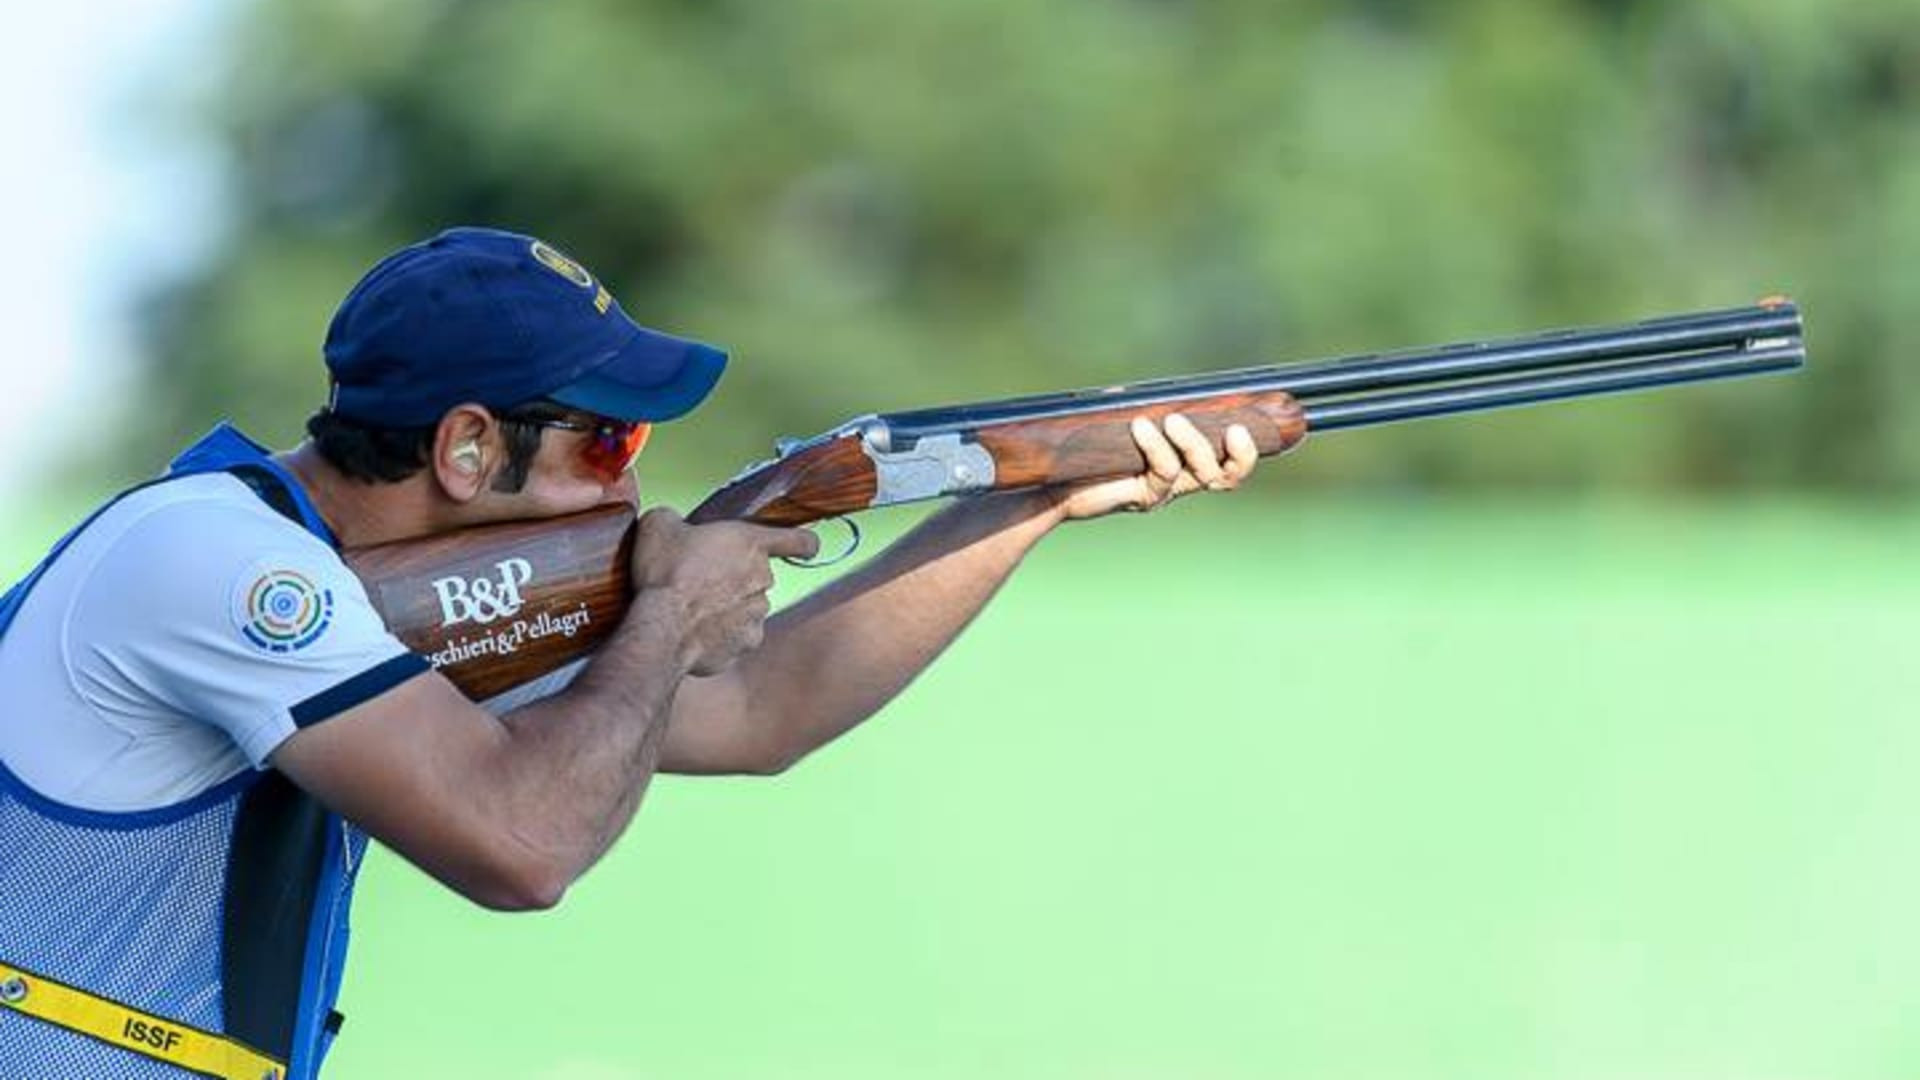 Exclusive: ISSF President Lisin under more pressure after announcing trial of new shotgun rules 